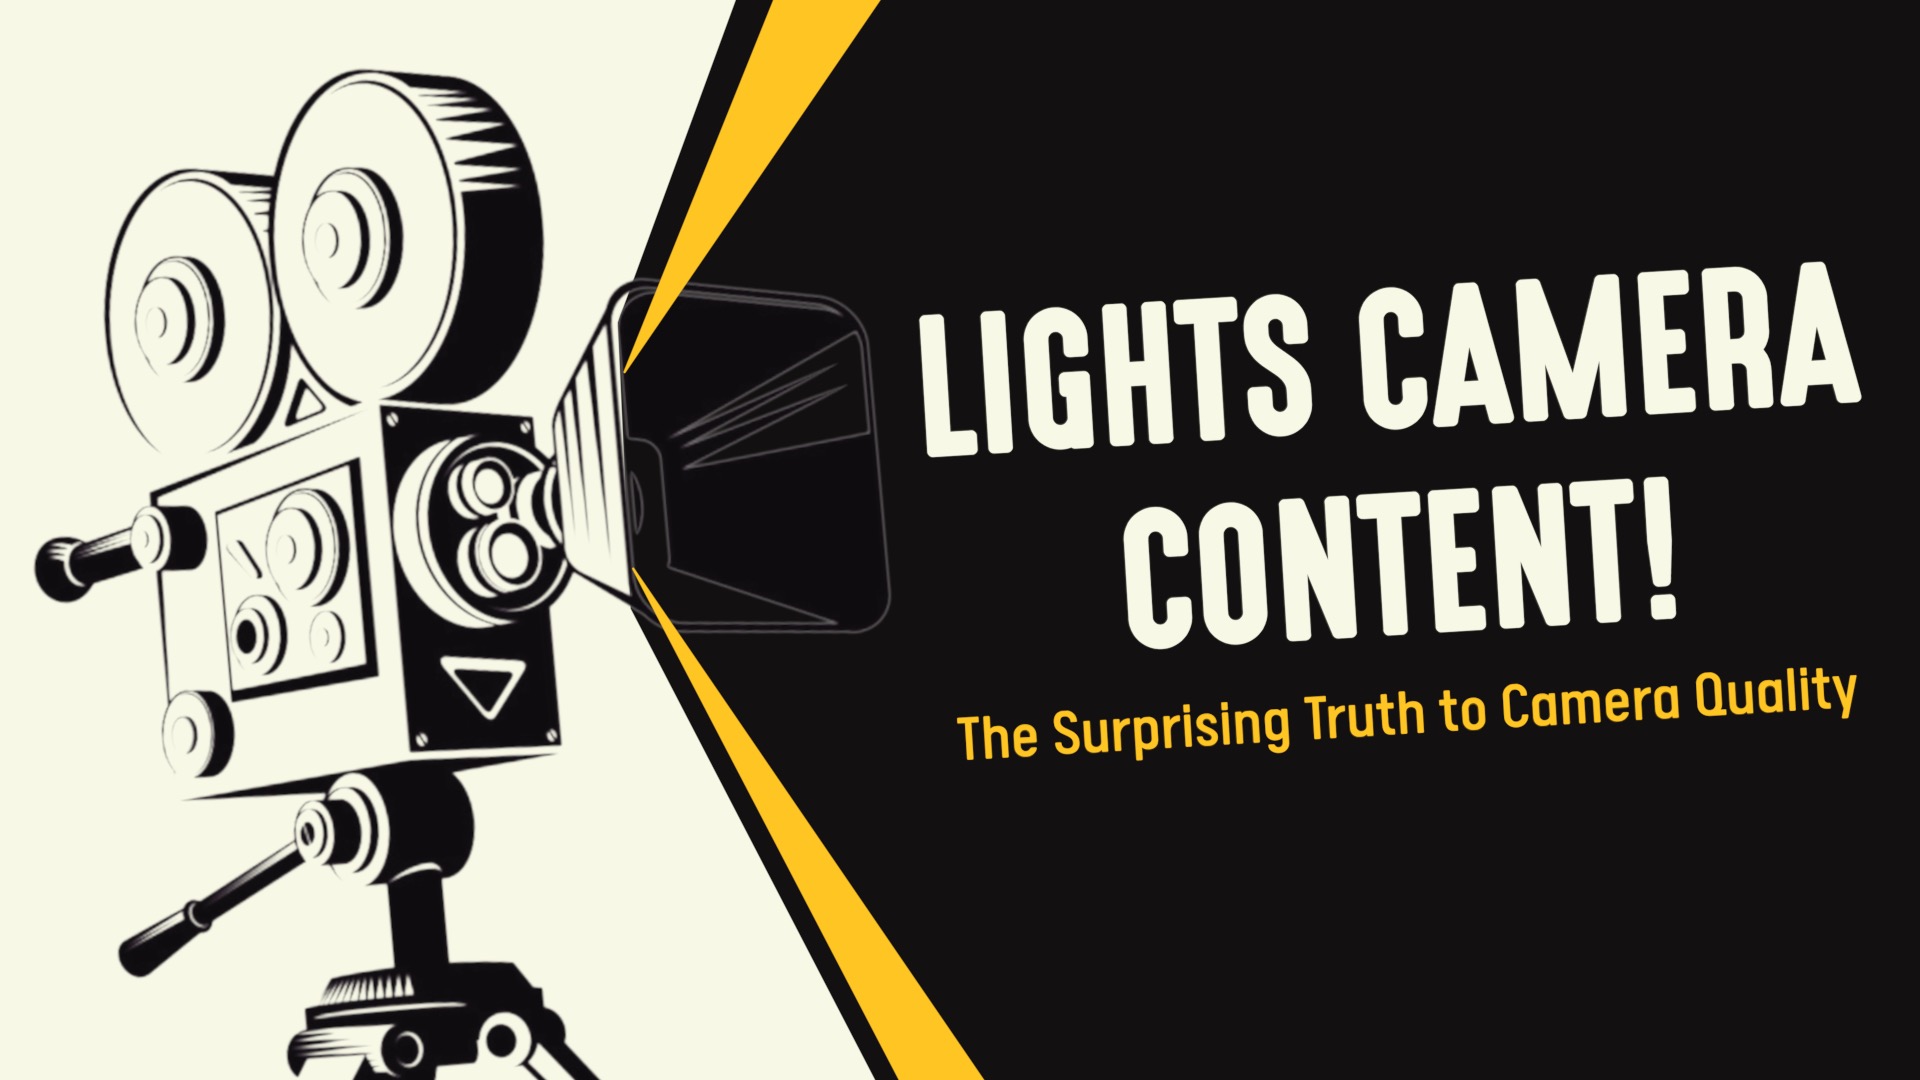 Lights Camera Content! The Surprising Truth to Camera Quality (video for financial Advisors)